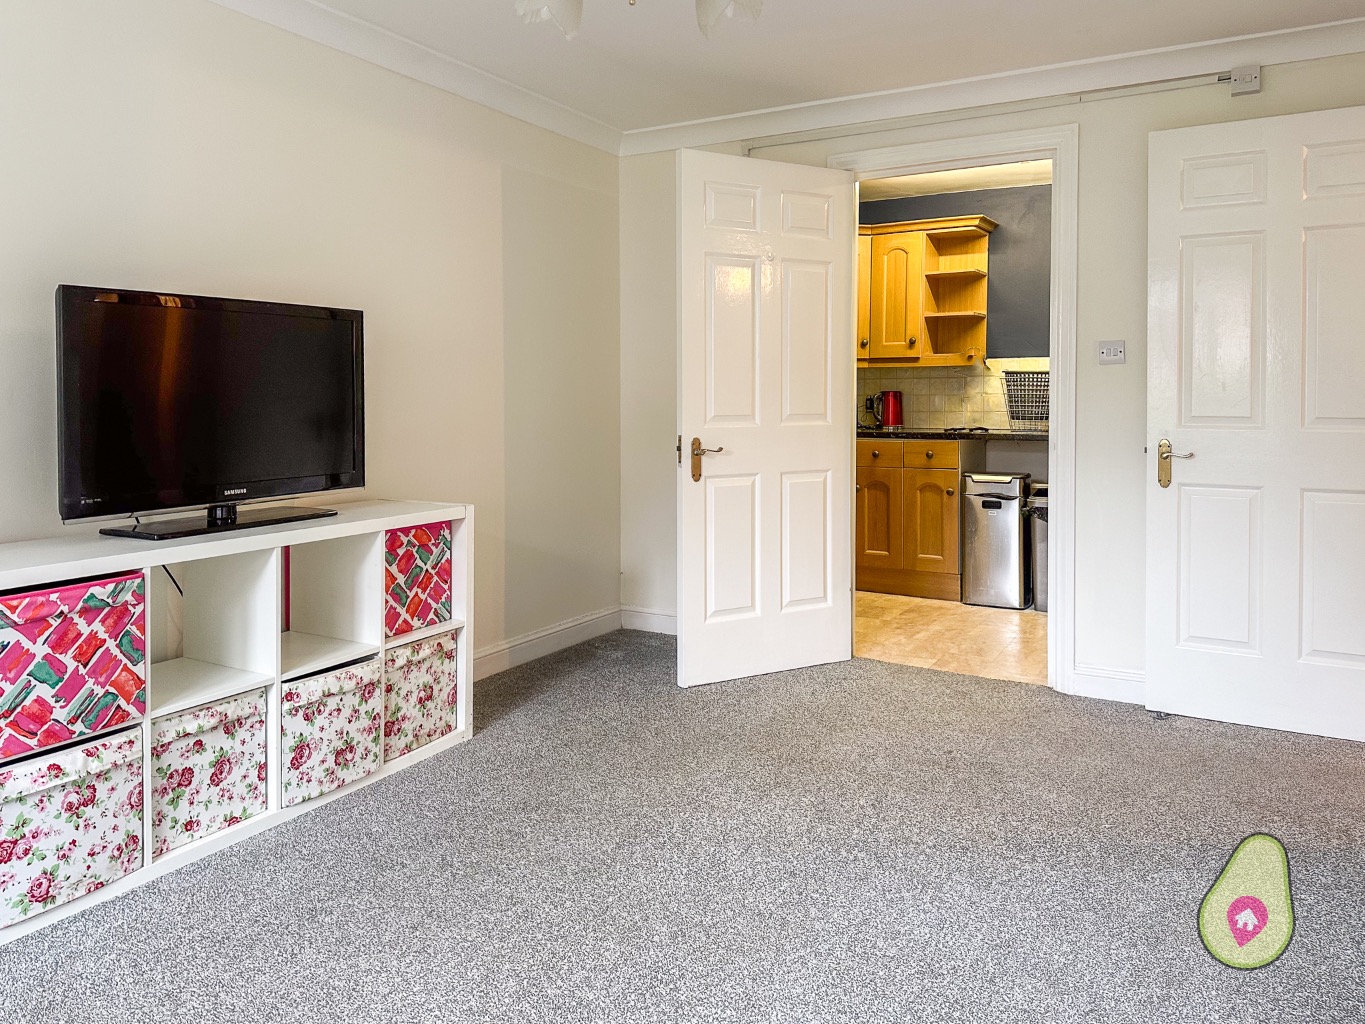 2 bed ground floor flat for sale in Regency Heights, Reading  - Property Image 5